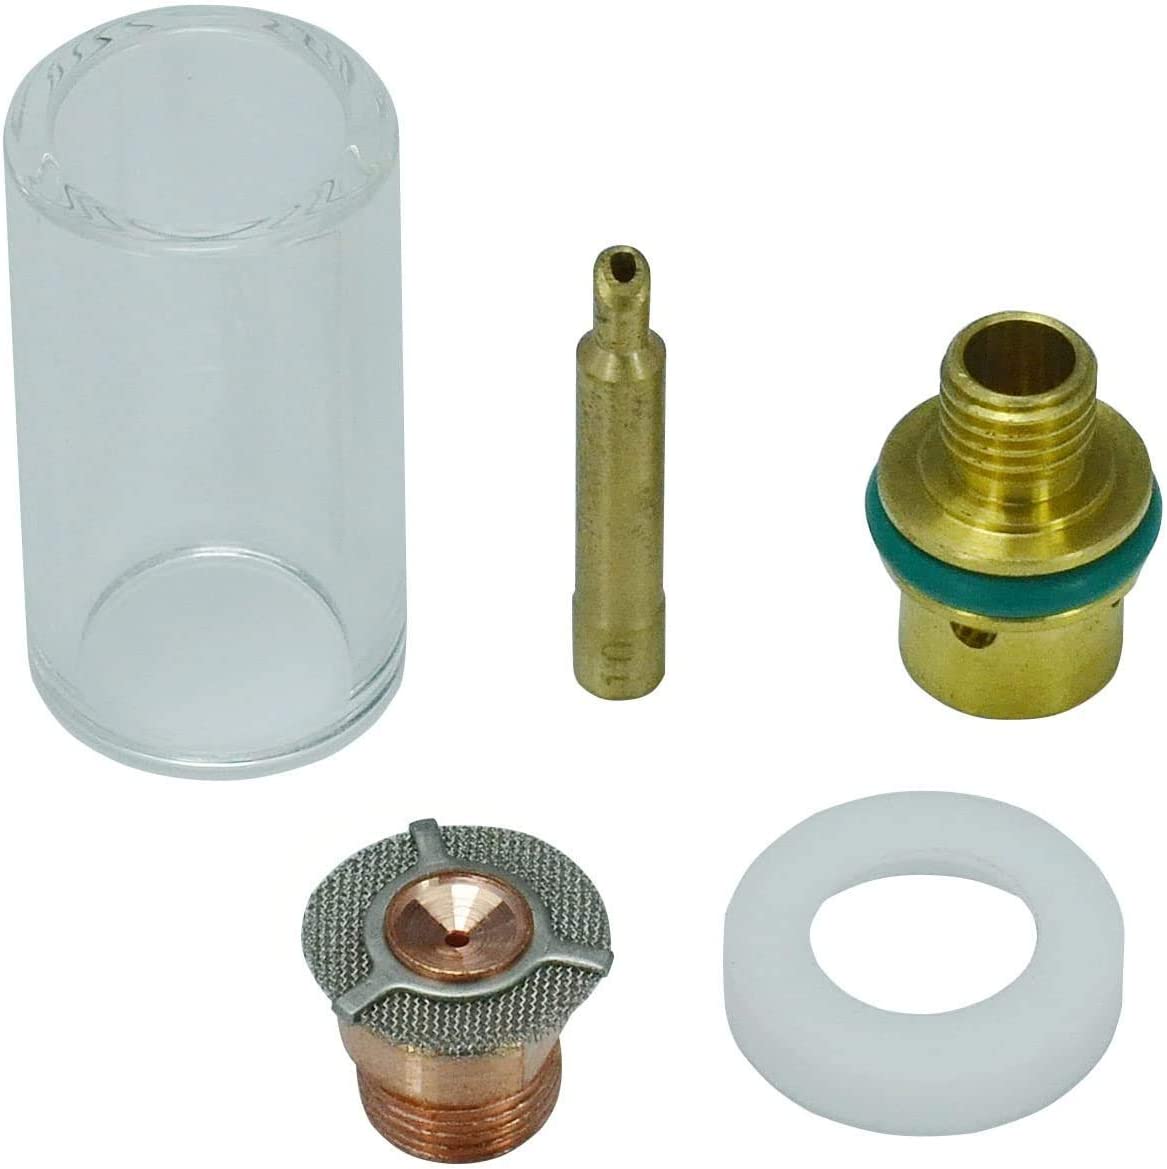 TIG Insulated Glass Cup (9/16" x 1-5/16") Kit Wedge Collet Body Tungsten Apdapter/Gas Saver (0.040“ & 1.0mm) and Silicone Cup Heatshield for WP SR 9 20 25 TIG Welding Torch 5pcs